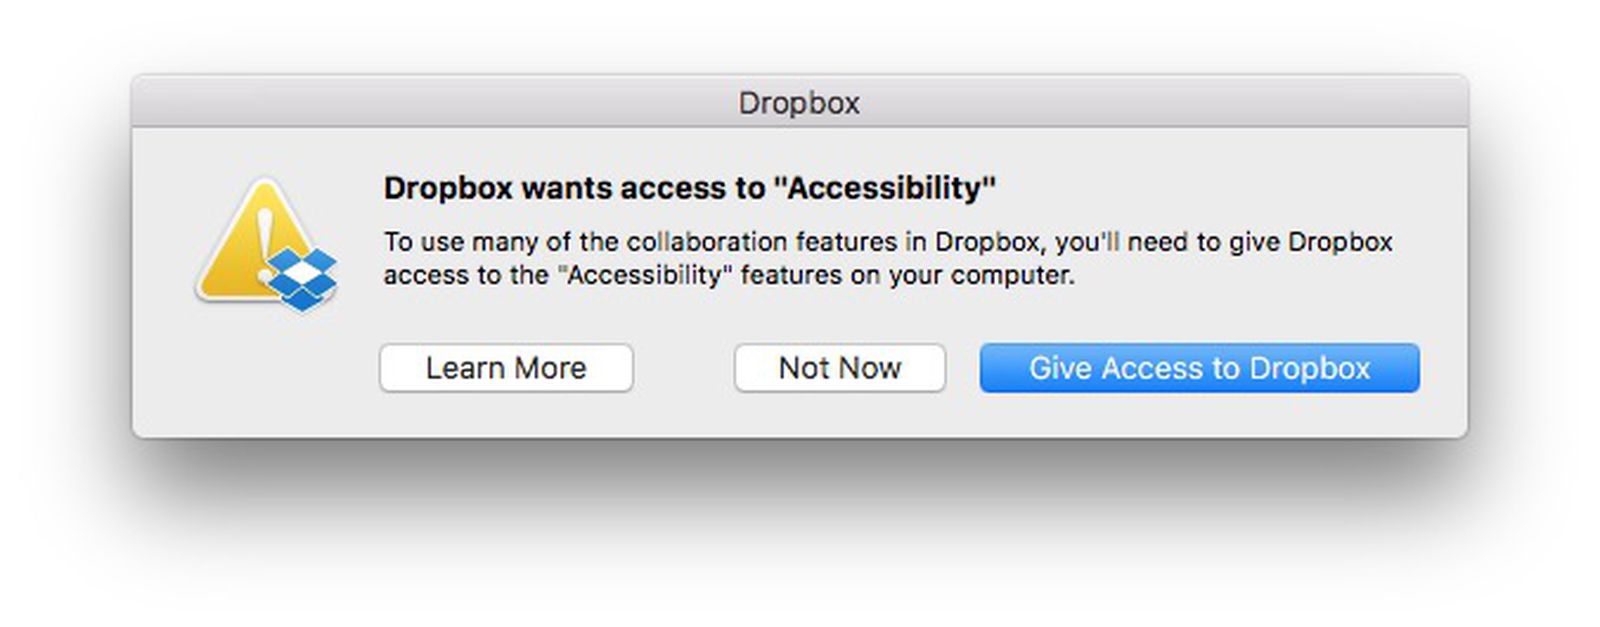 what is the latest version of dropbox for mac os sierra